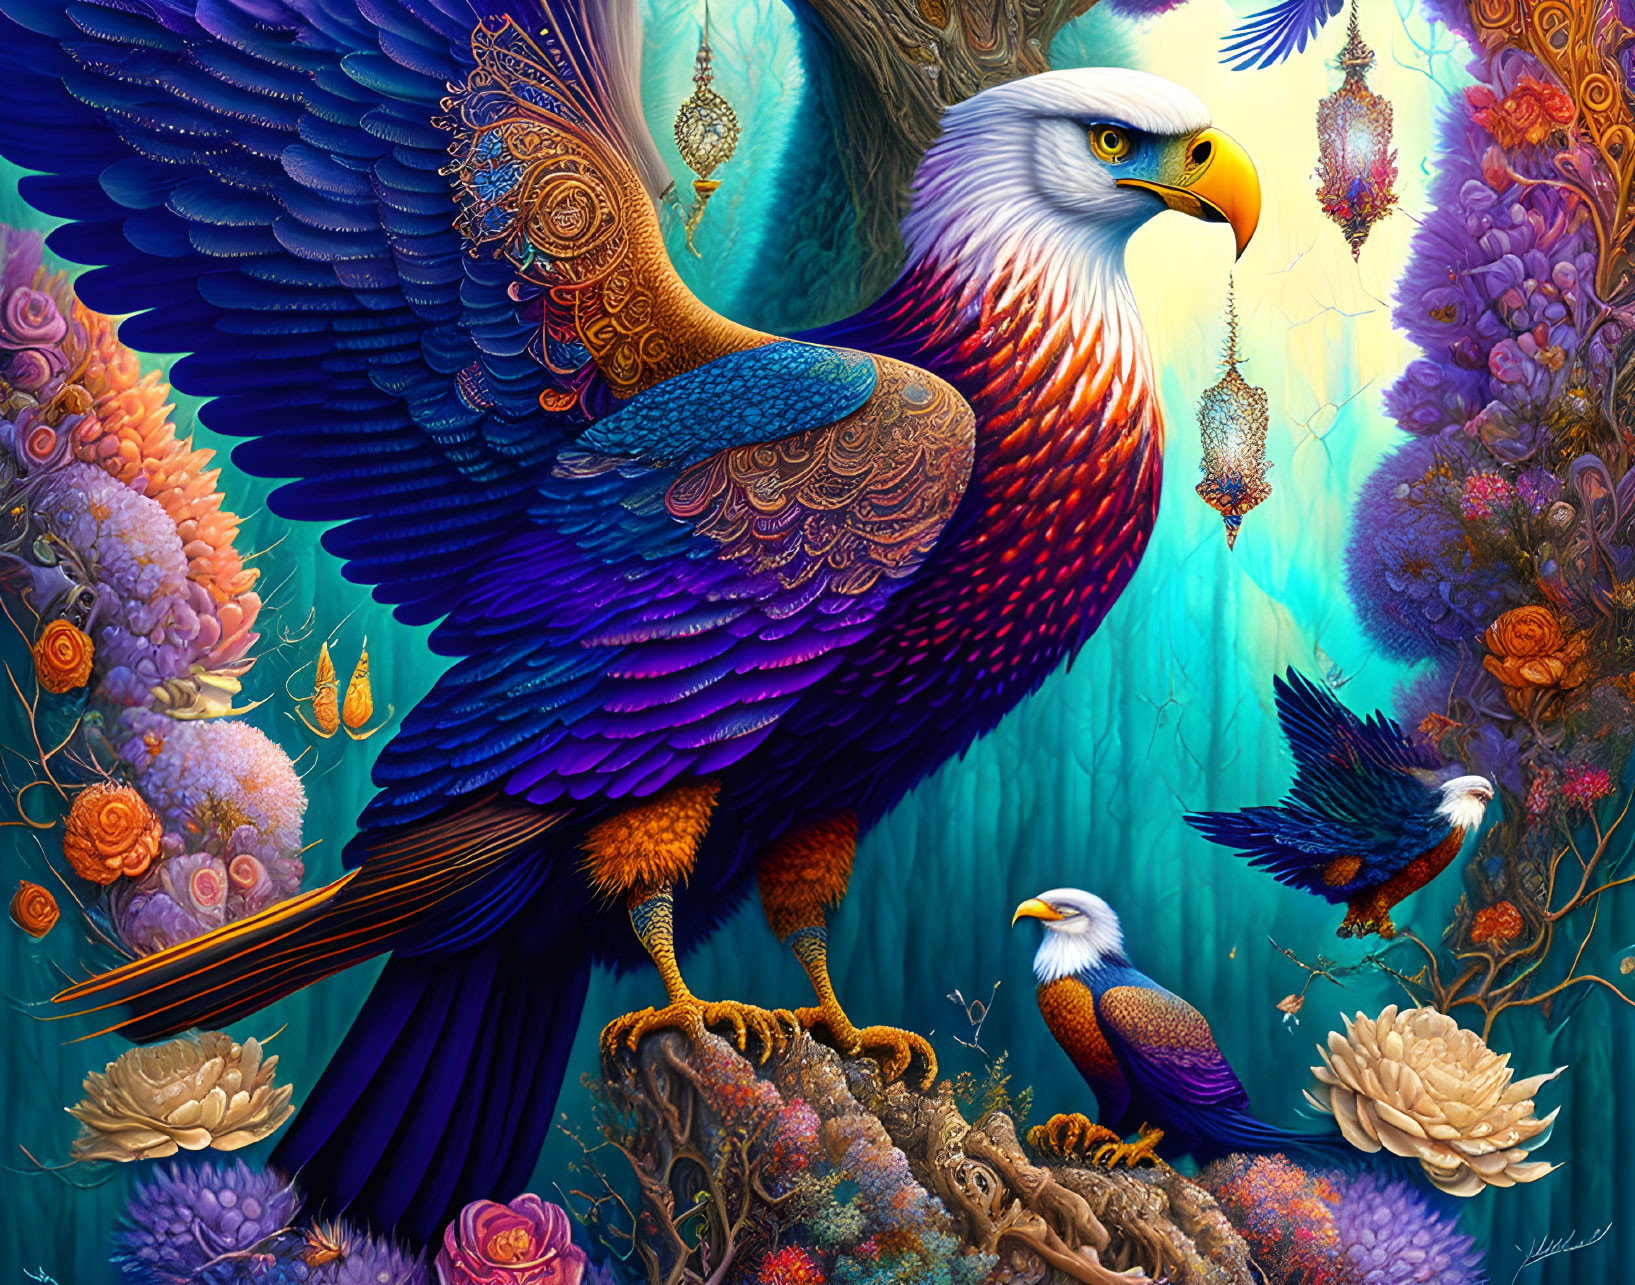 Detailed Eagle Illustration in Colorful Forest Setting